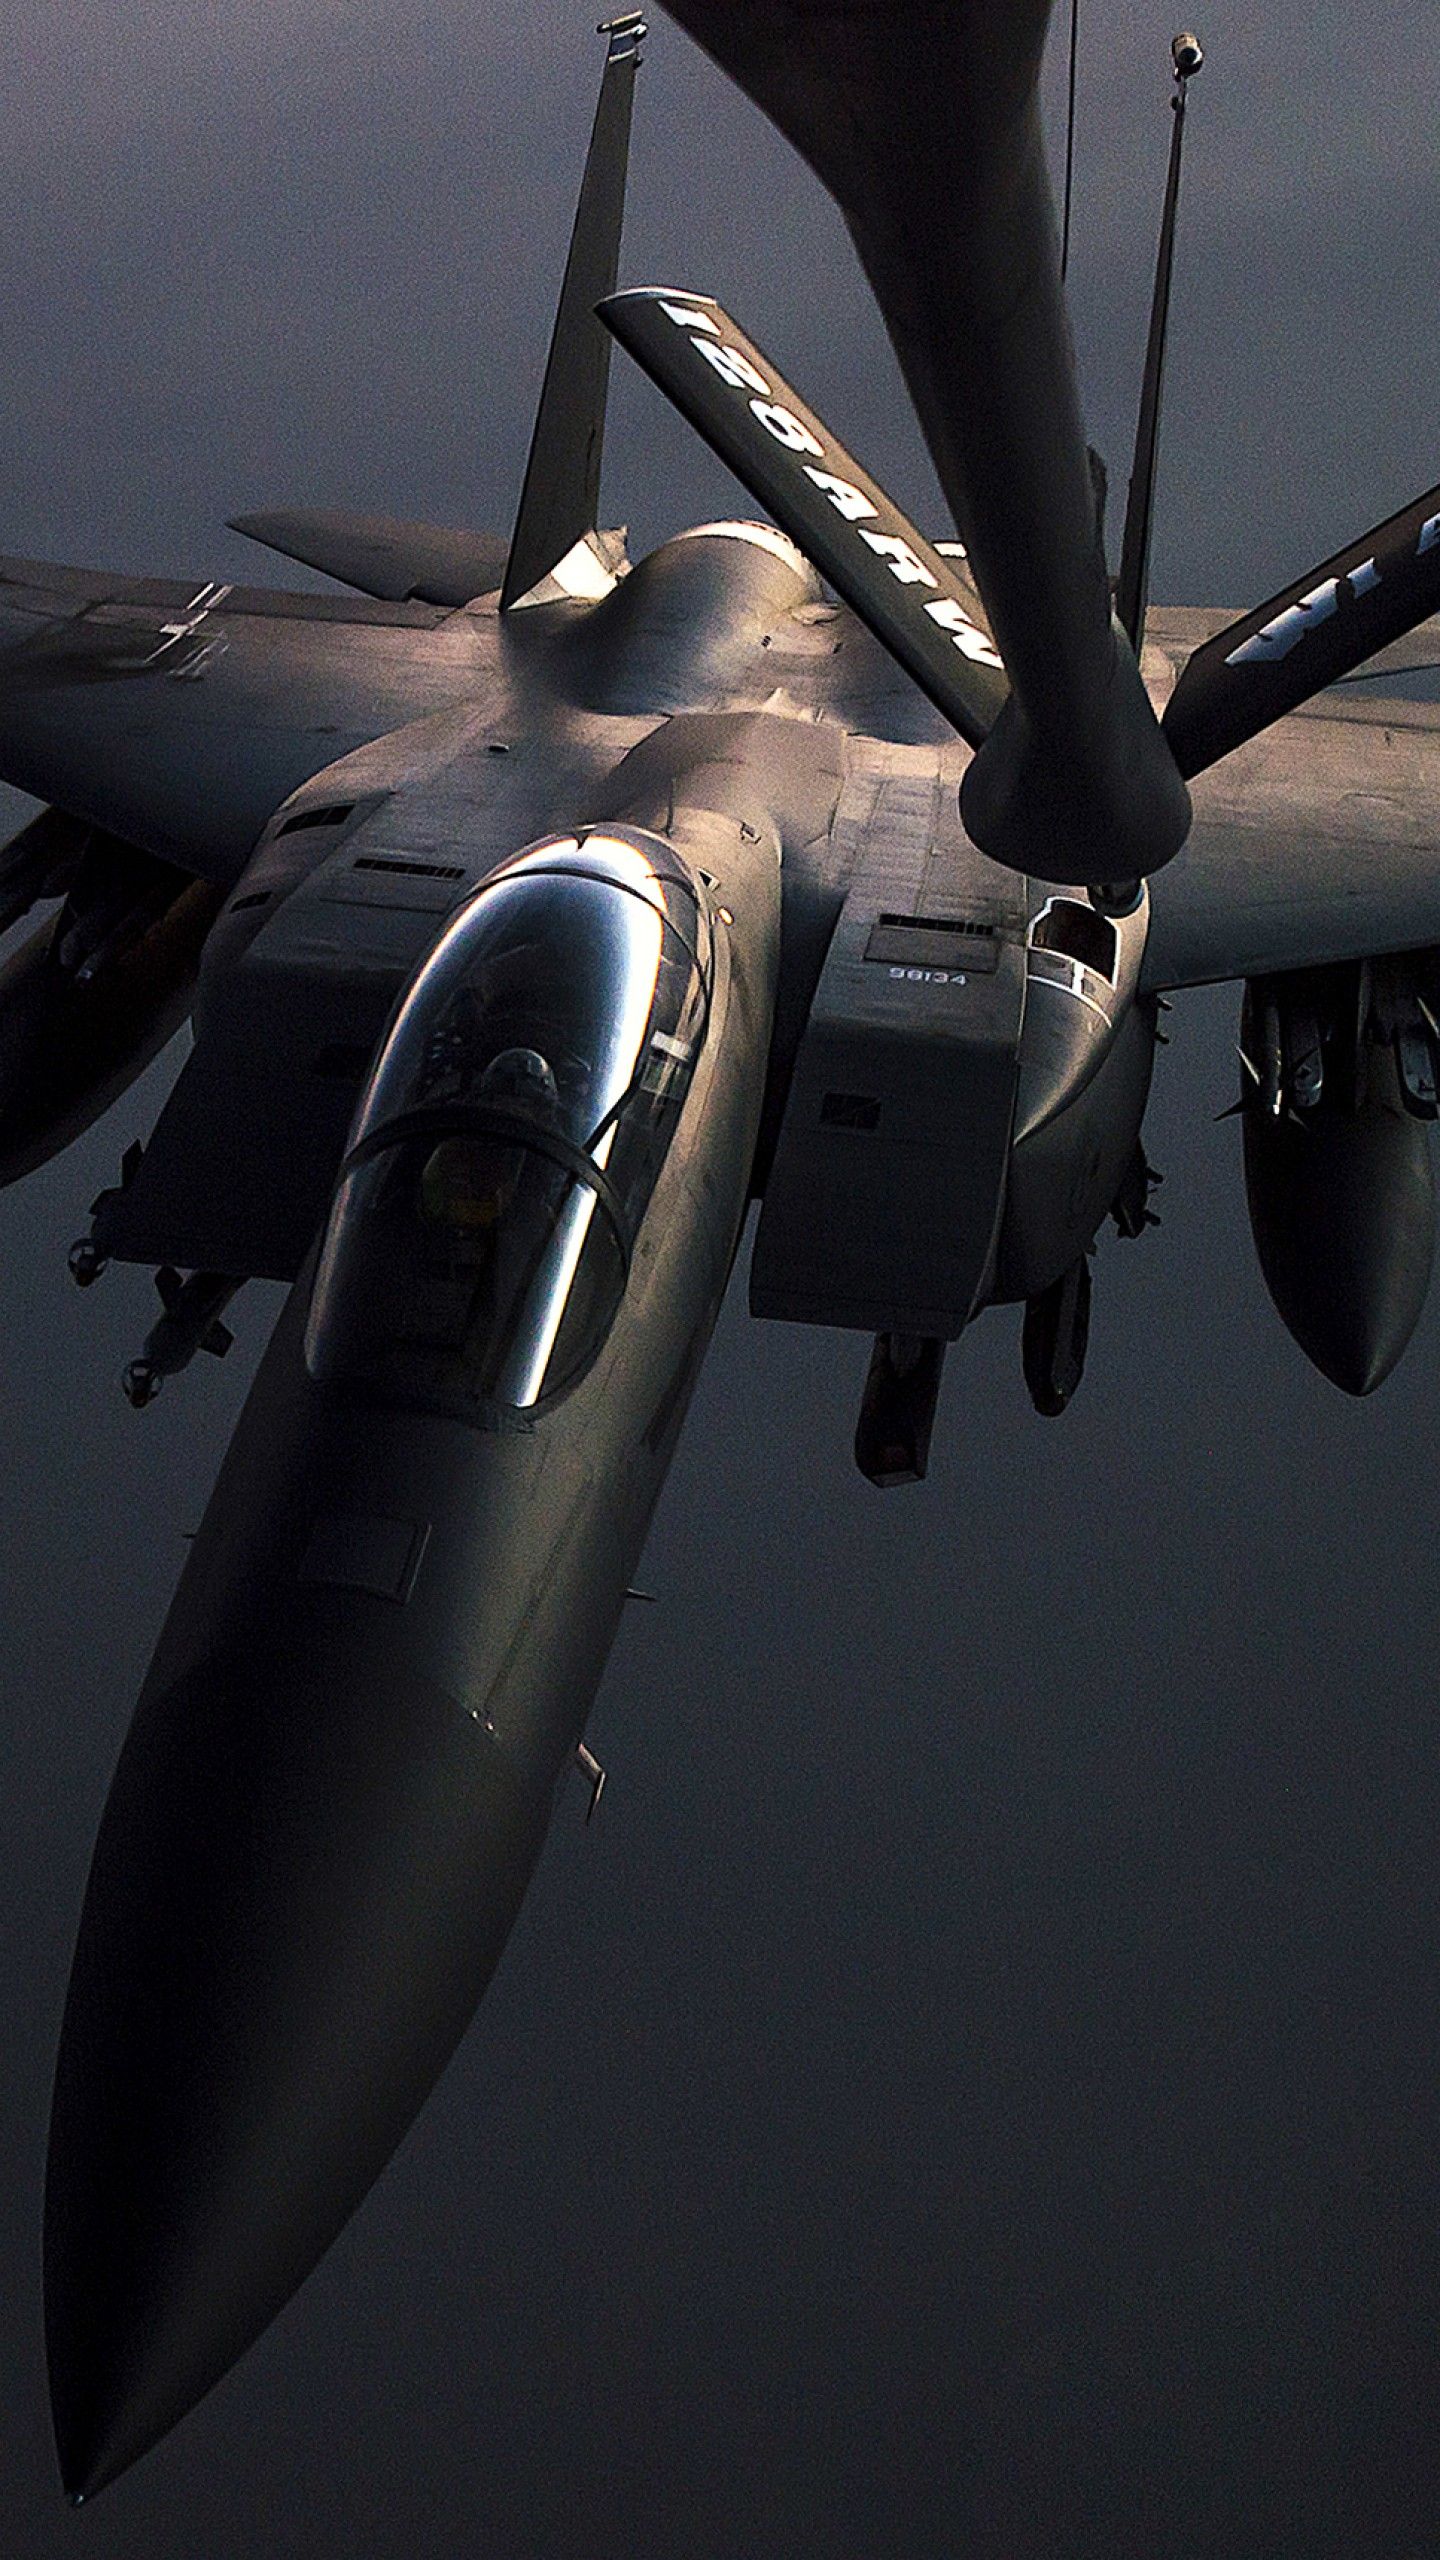 Wallpaper McDonnell Douglas F 15 Eagle, Fighter Aircraft, US Air